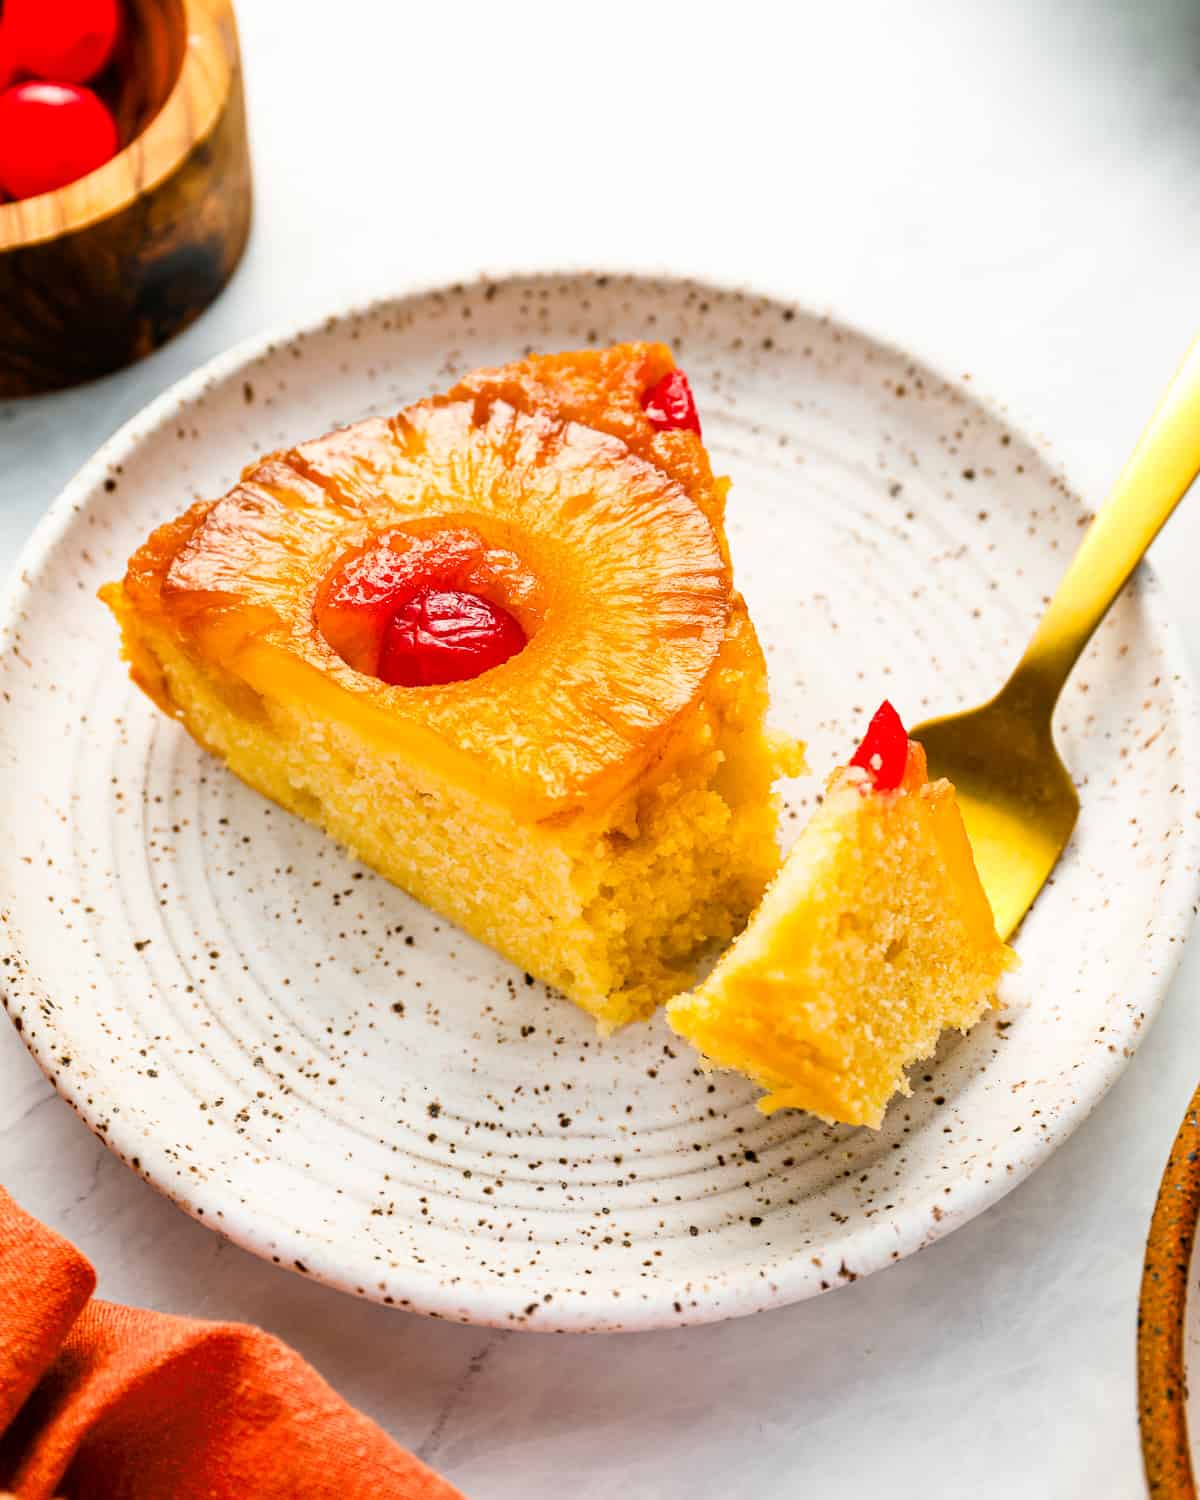 A slice of pineapple upside down cake on a plate.